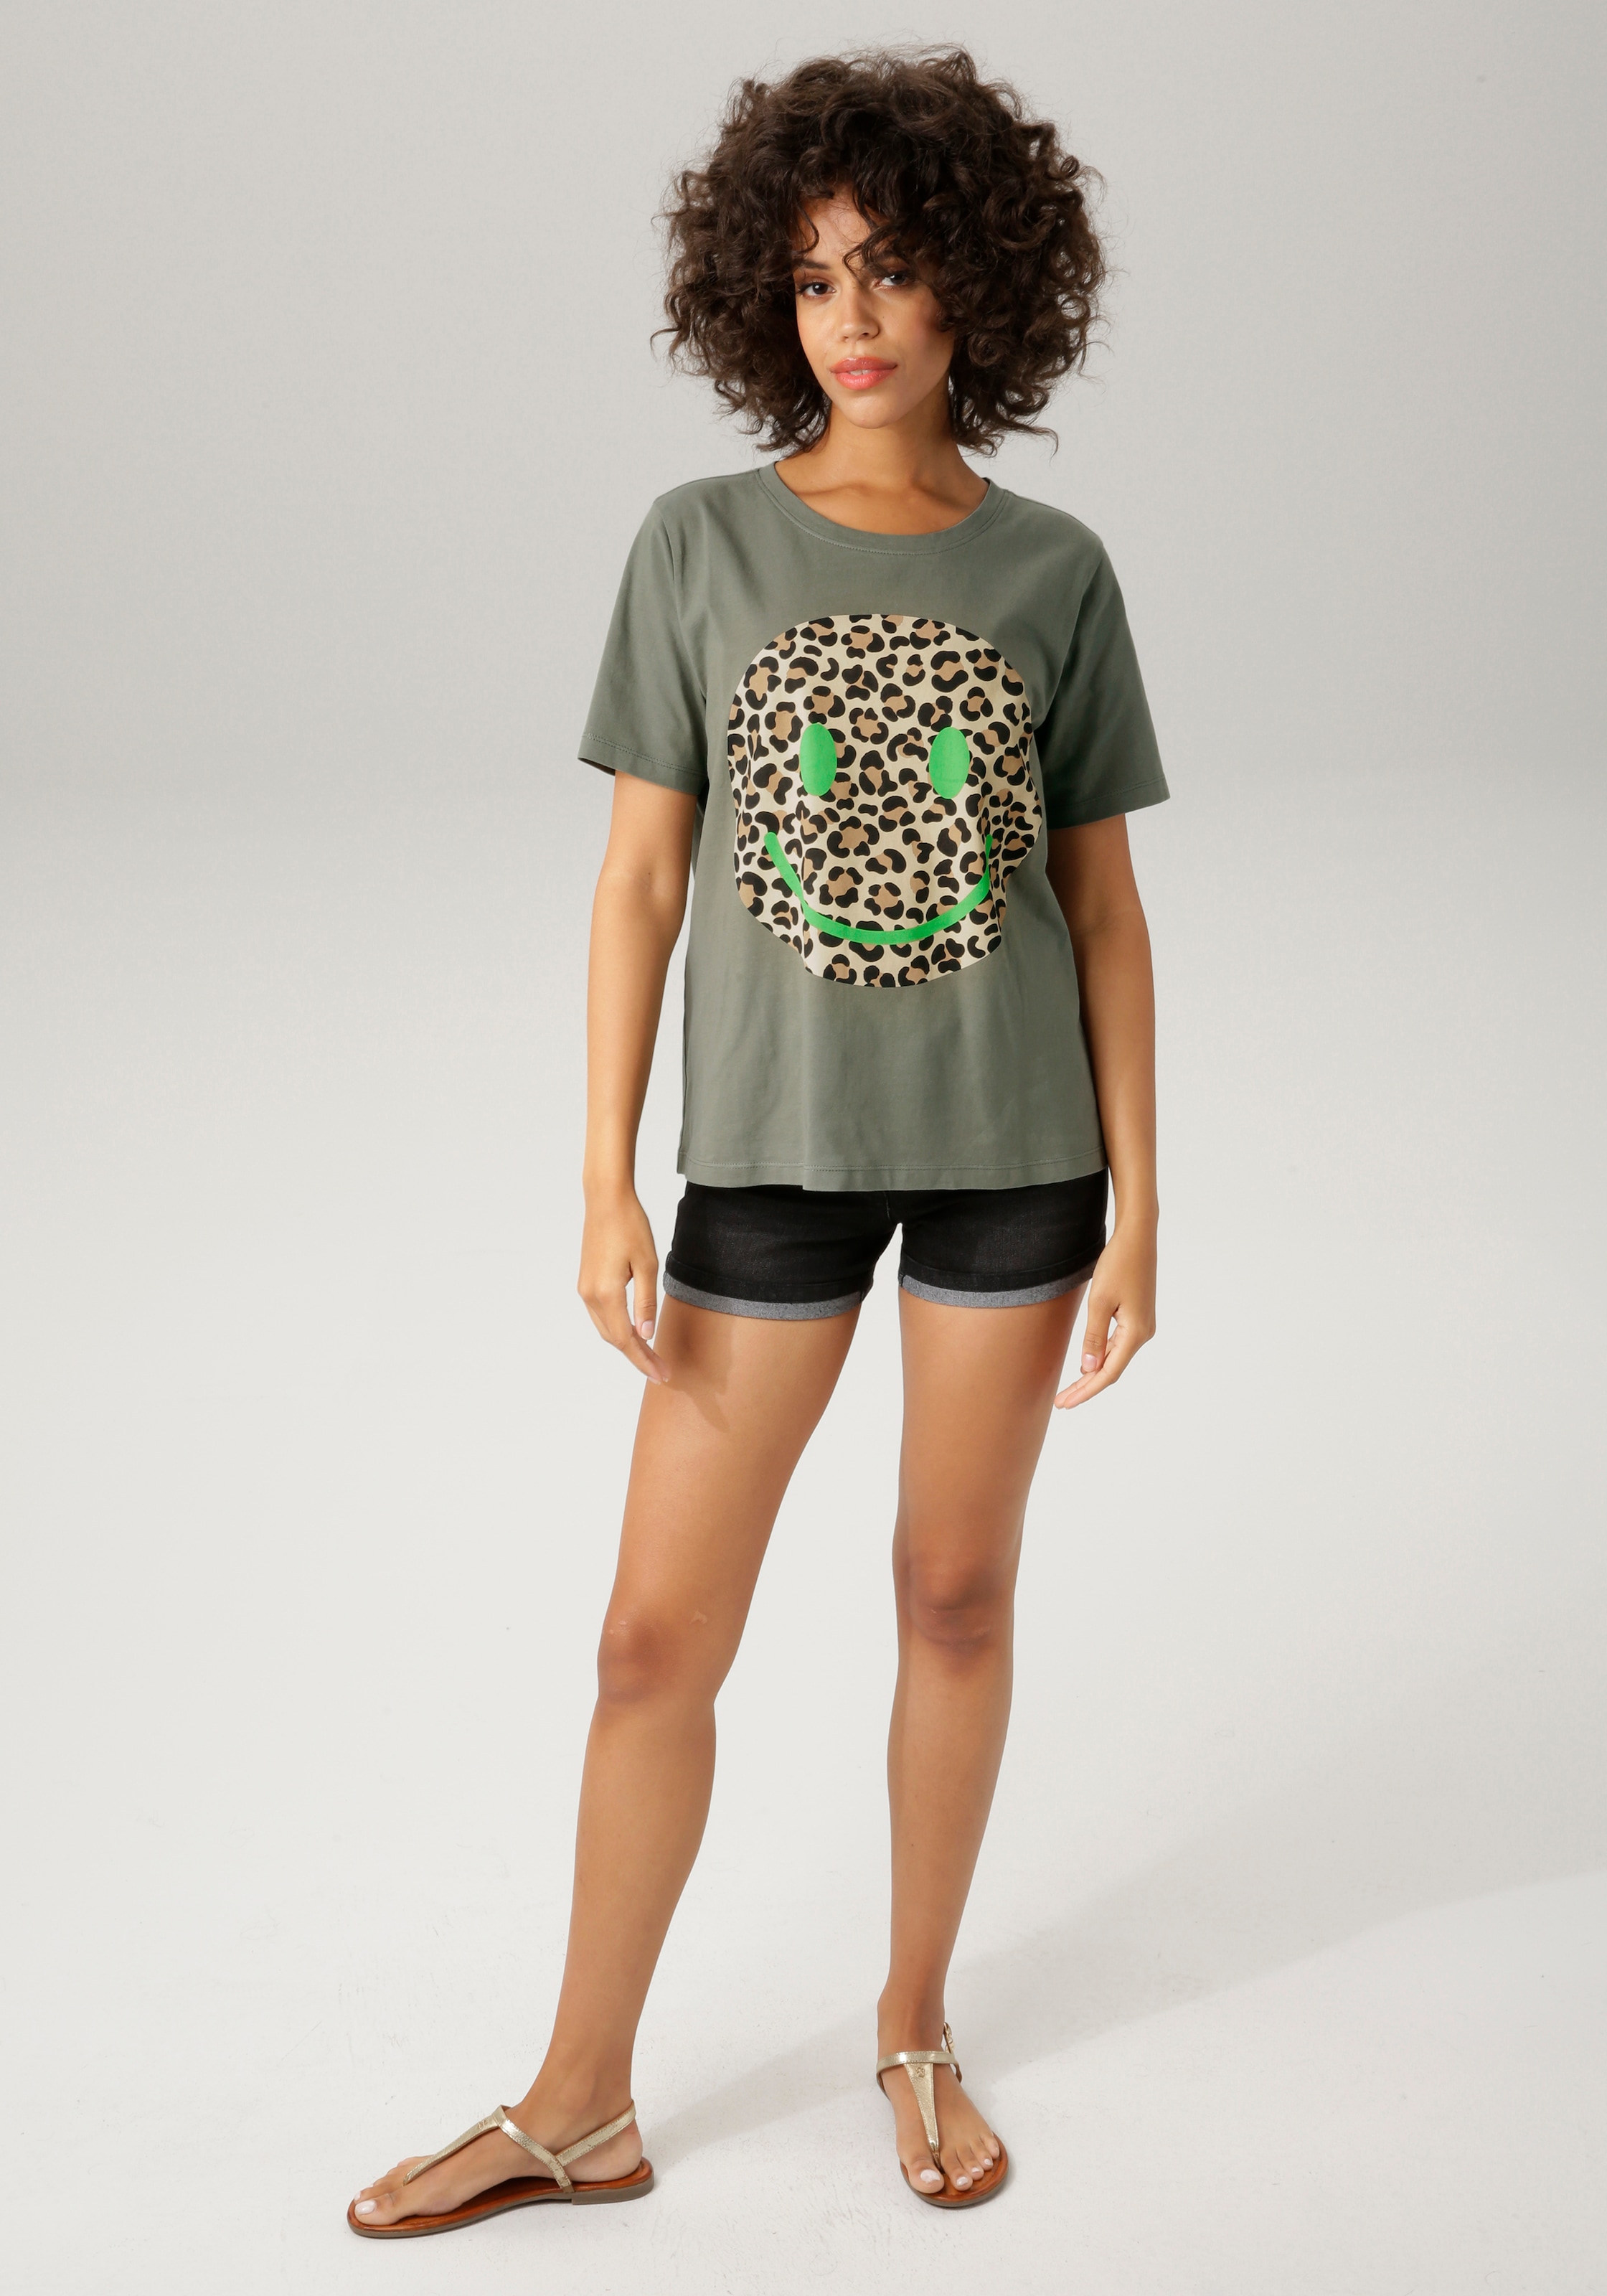 Aniston CASUAL T-Shirt, mit Smiley-Frontprint im Animal-Look